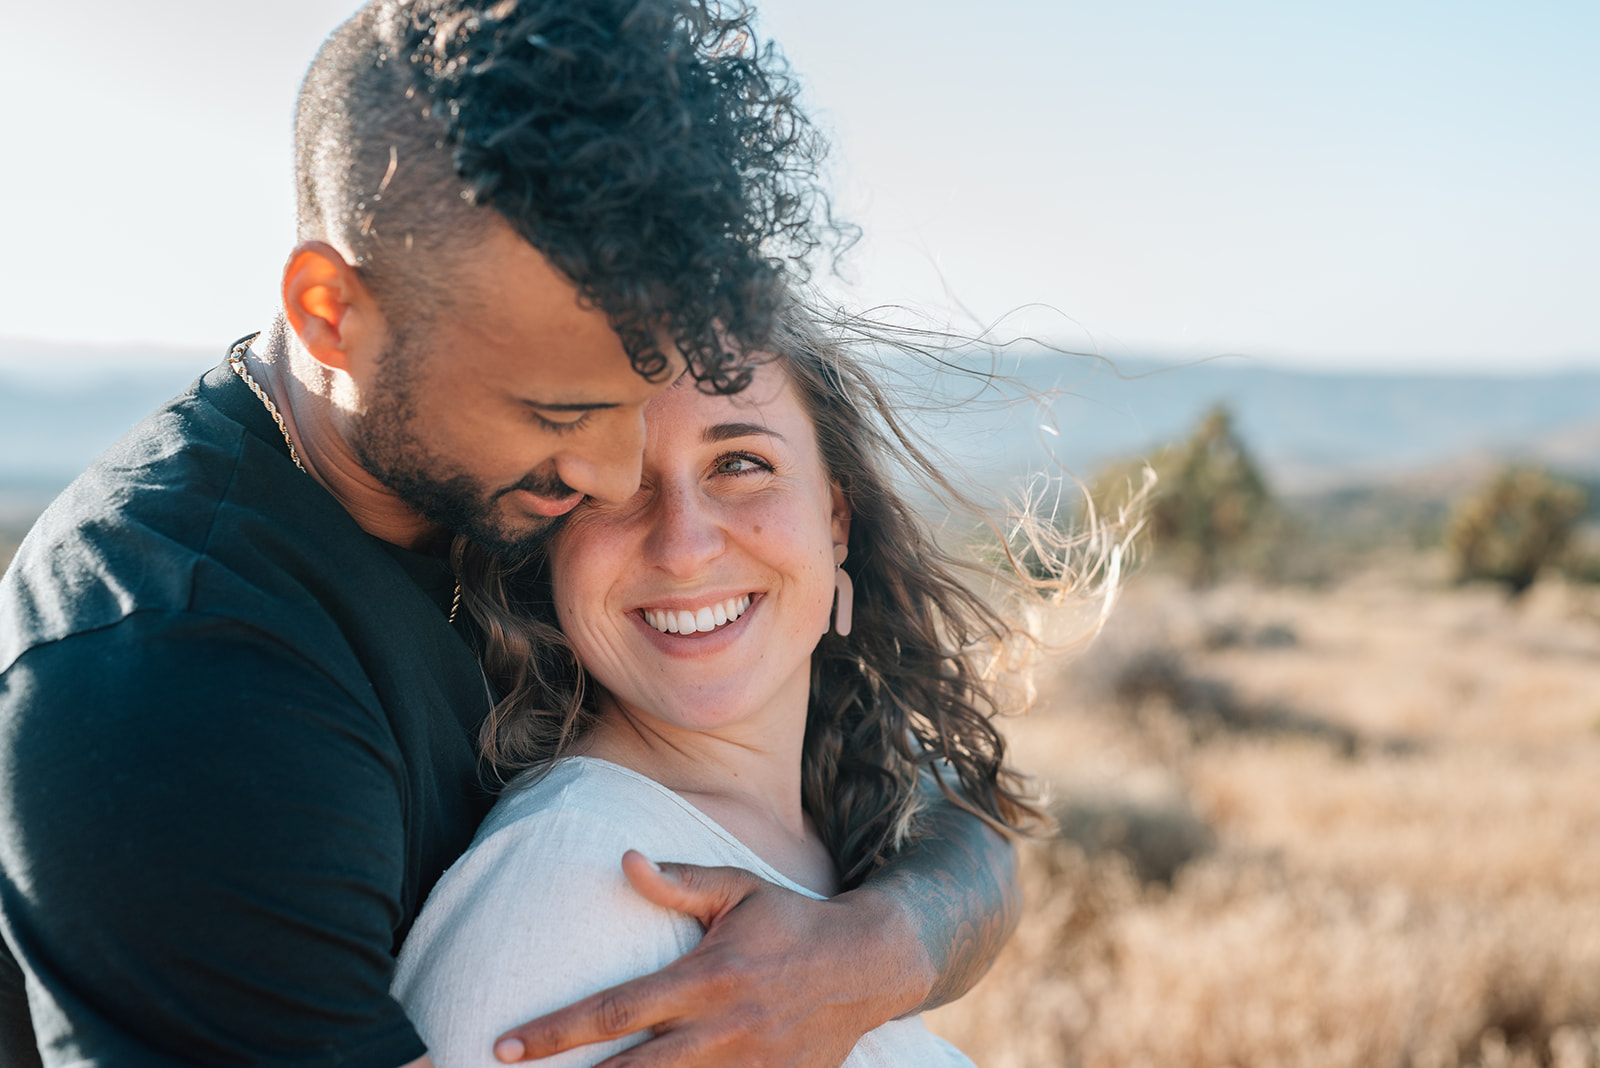 Woman smiles up at man as he hugs her from behind during their desert engagement session